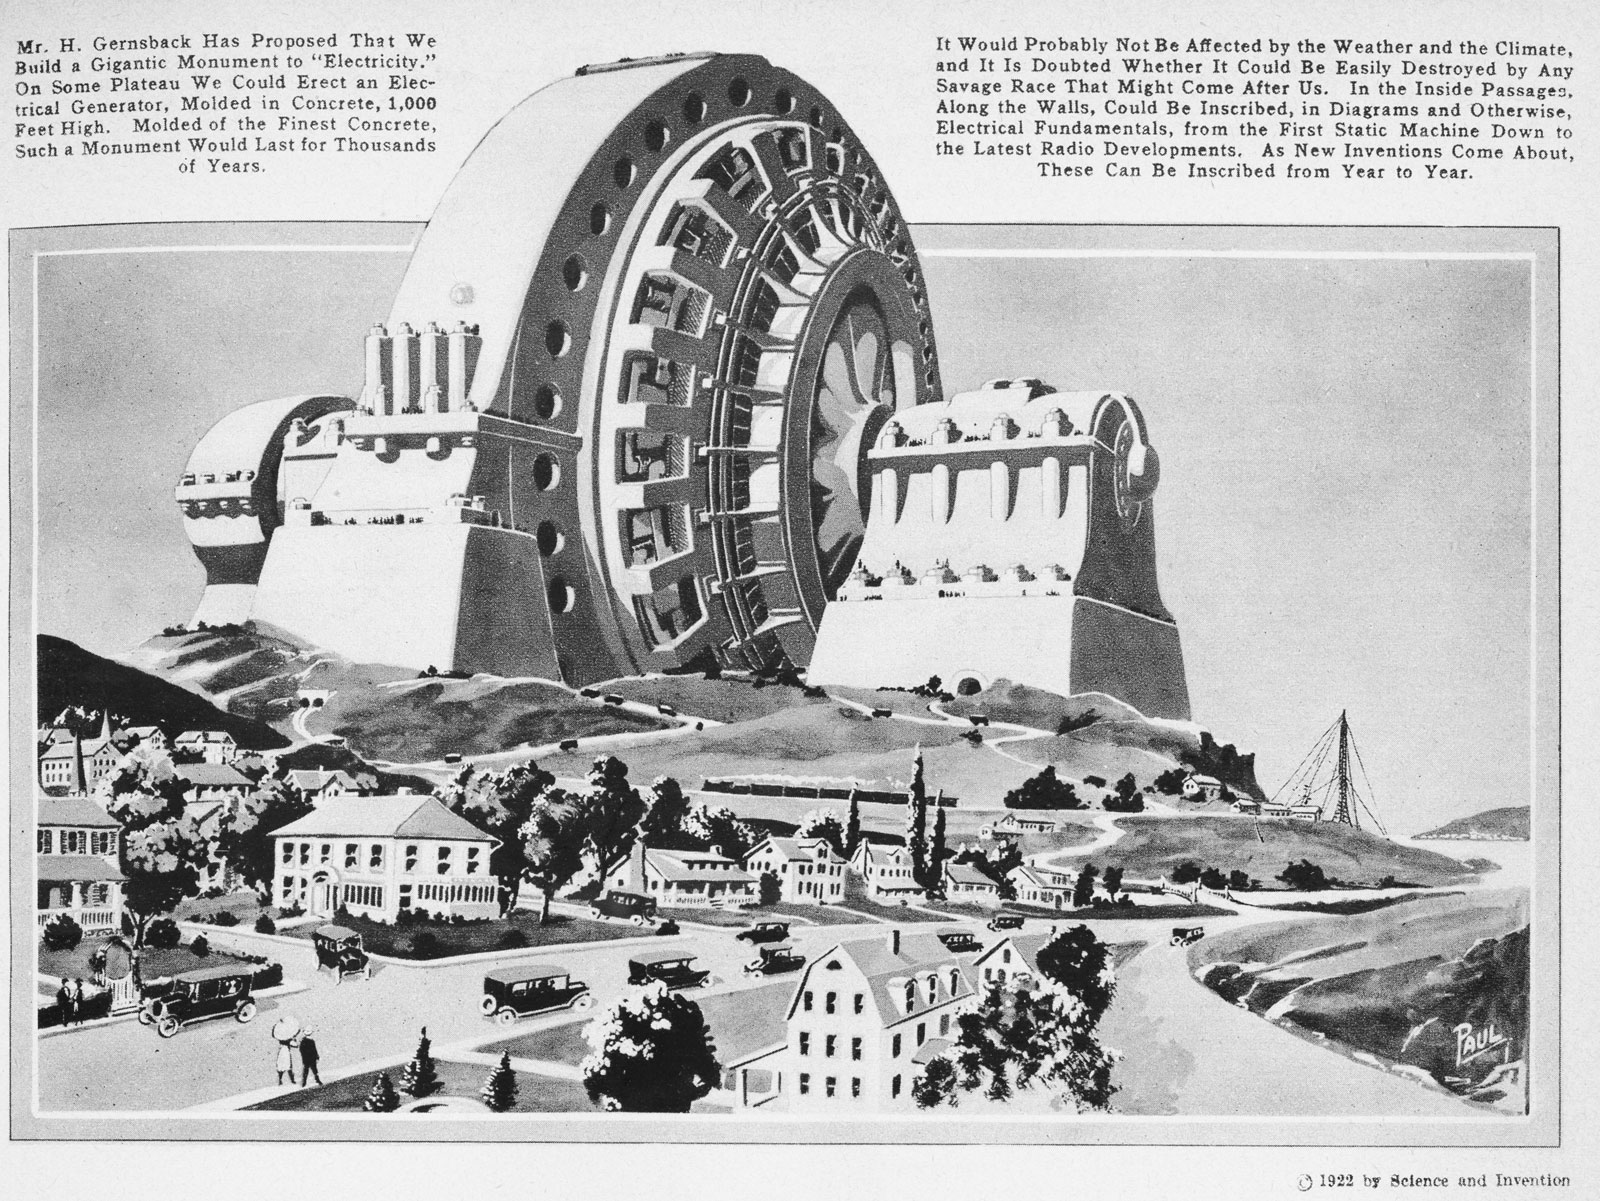 Gernsback's proposal for a "Gigantic Monument to Electricity," from <em>Science and Invention</em>, October, 1922